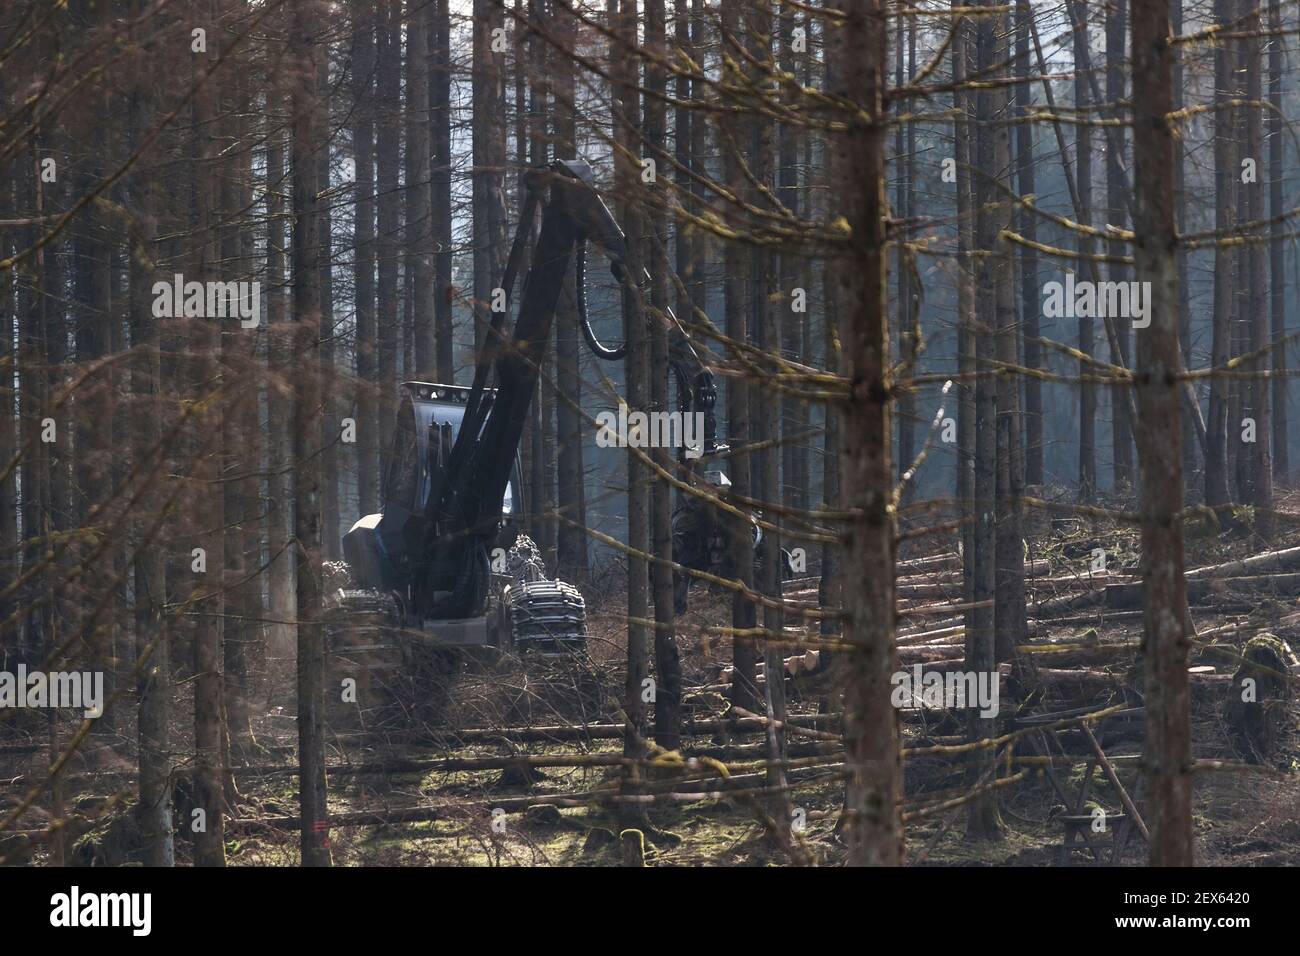 a modern forest harvester at work in a dead forest Stock Photo